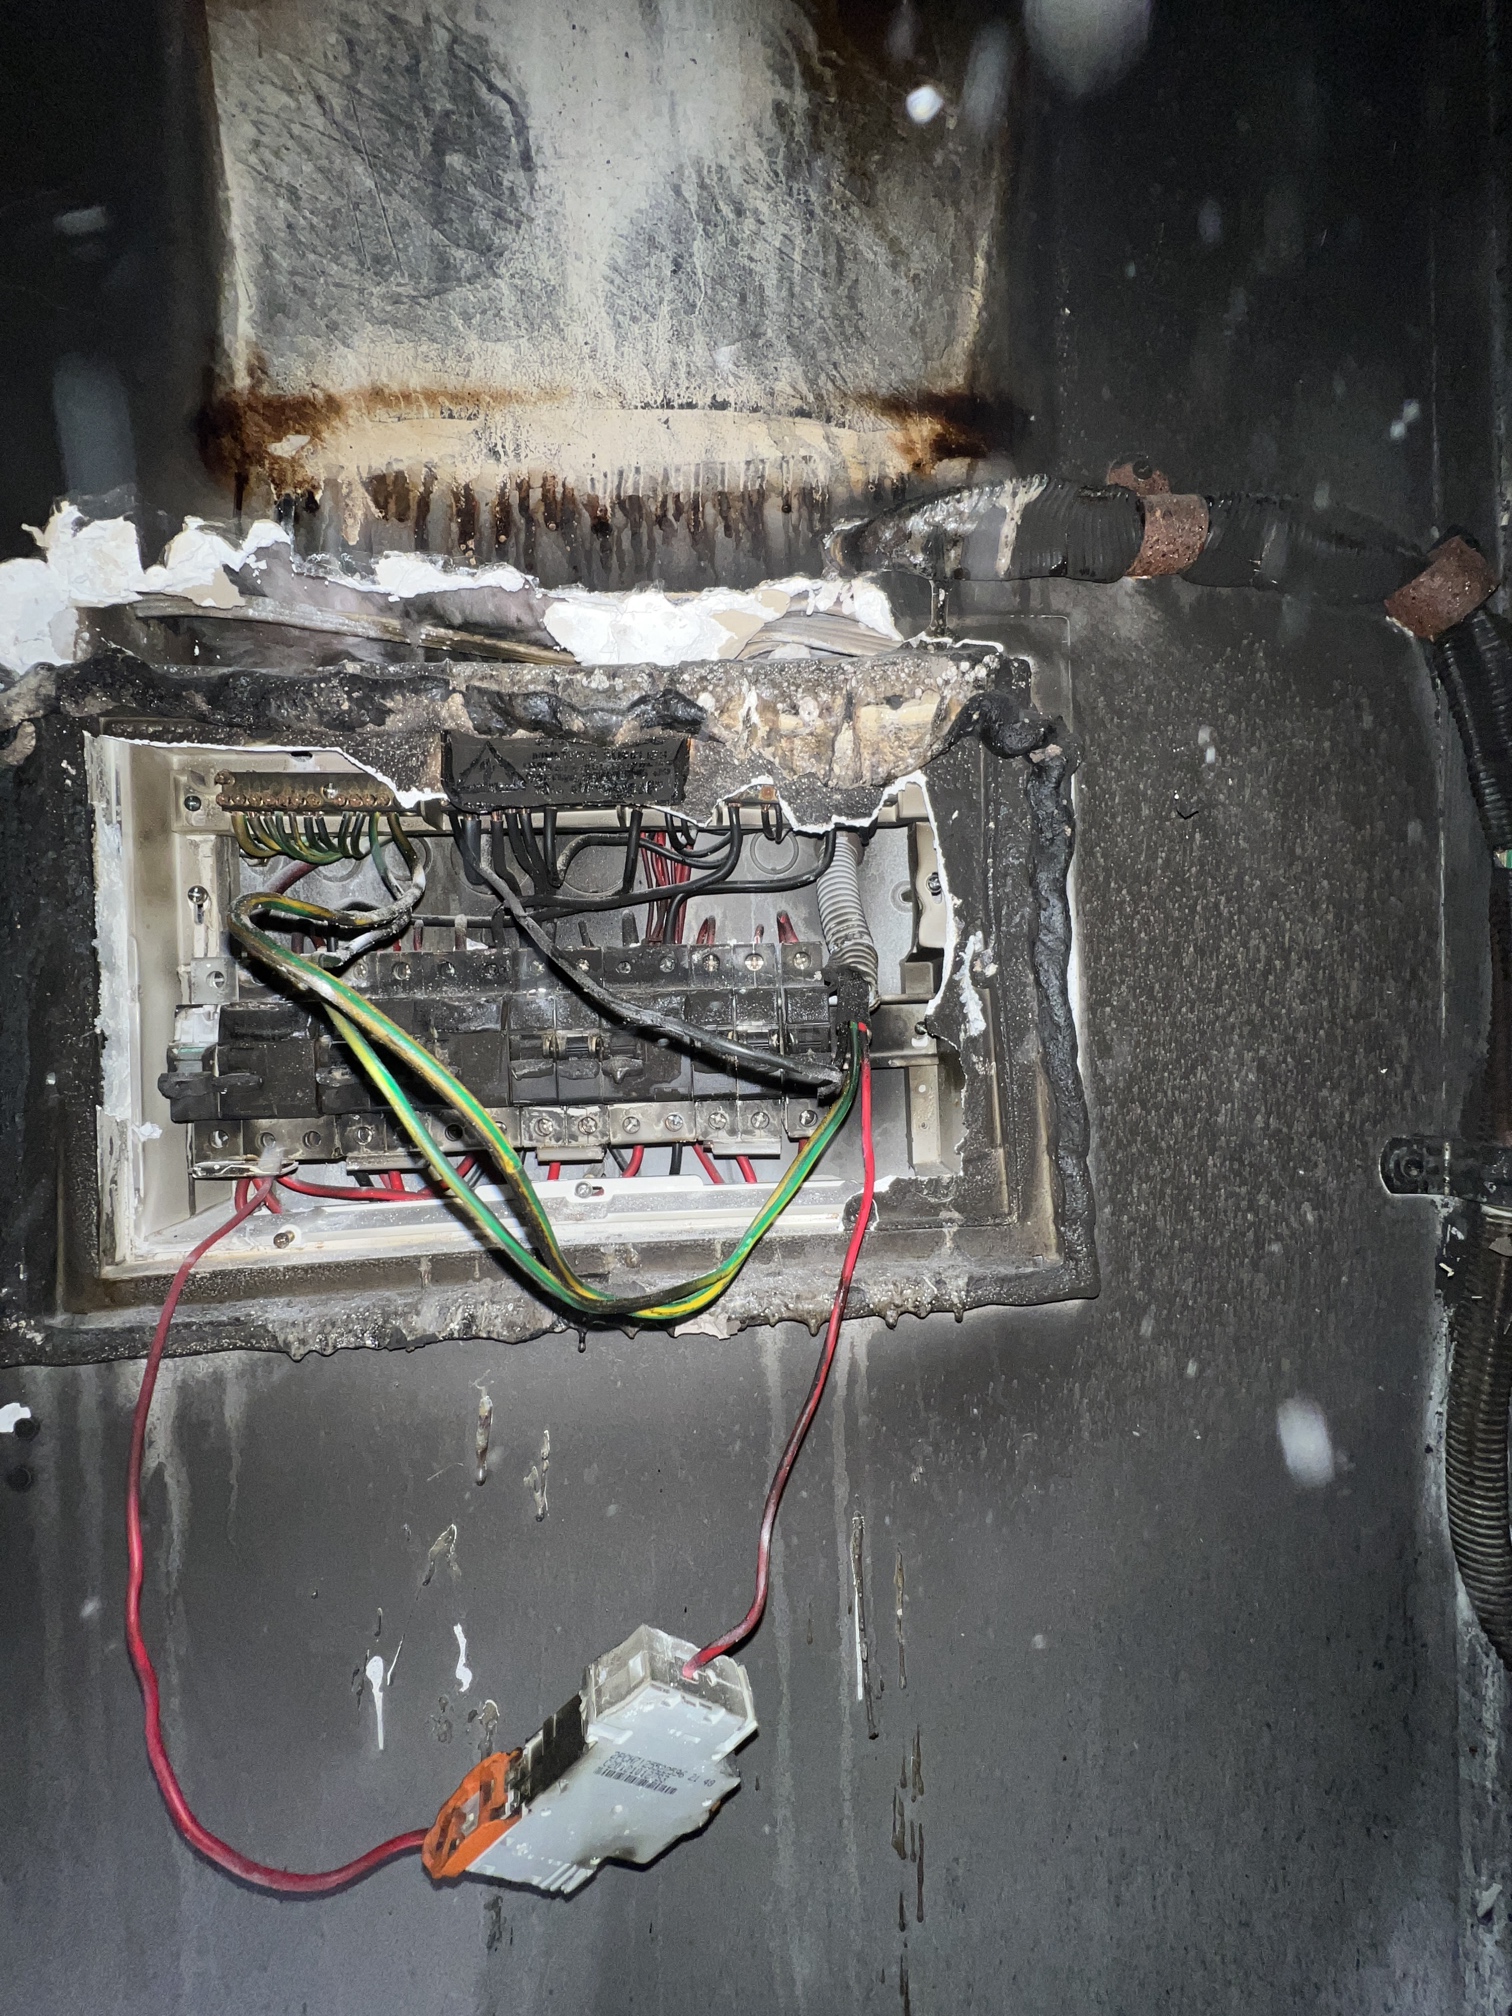 Electrical switchboard that has been damaged through extreme heat by fire caused by electrical fault